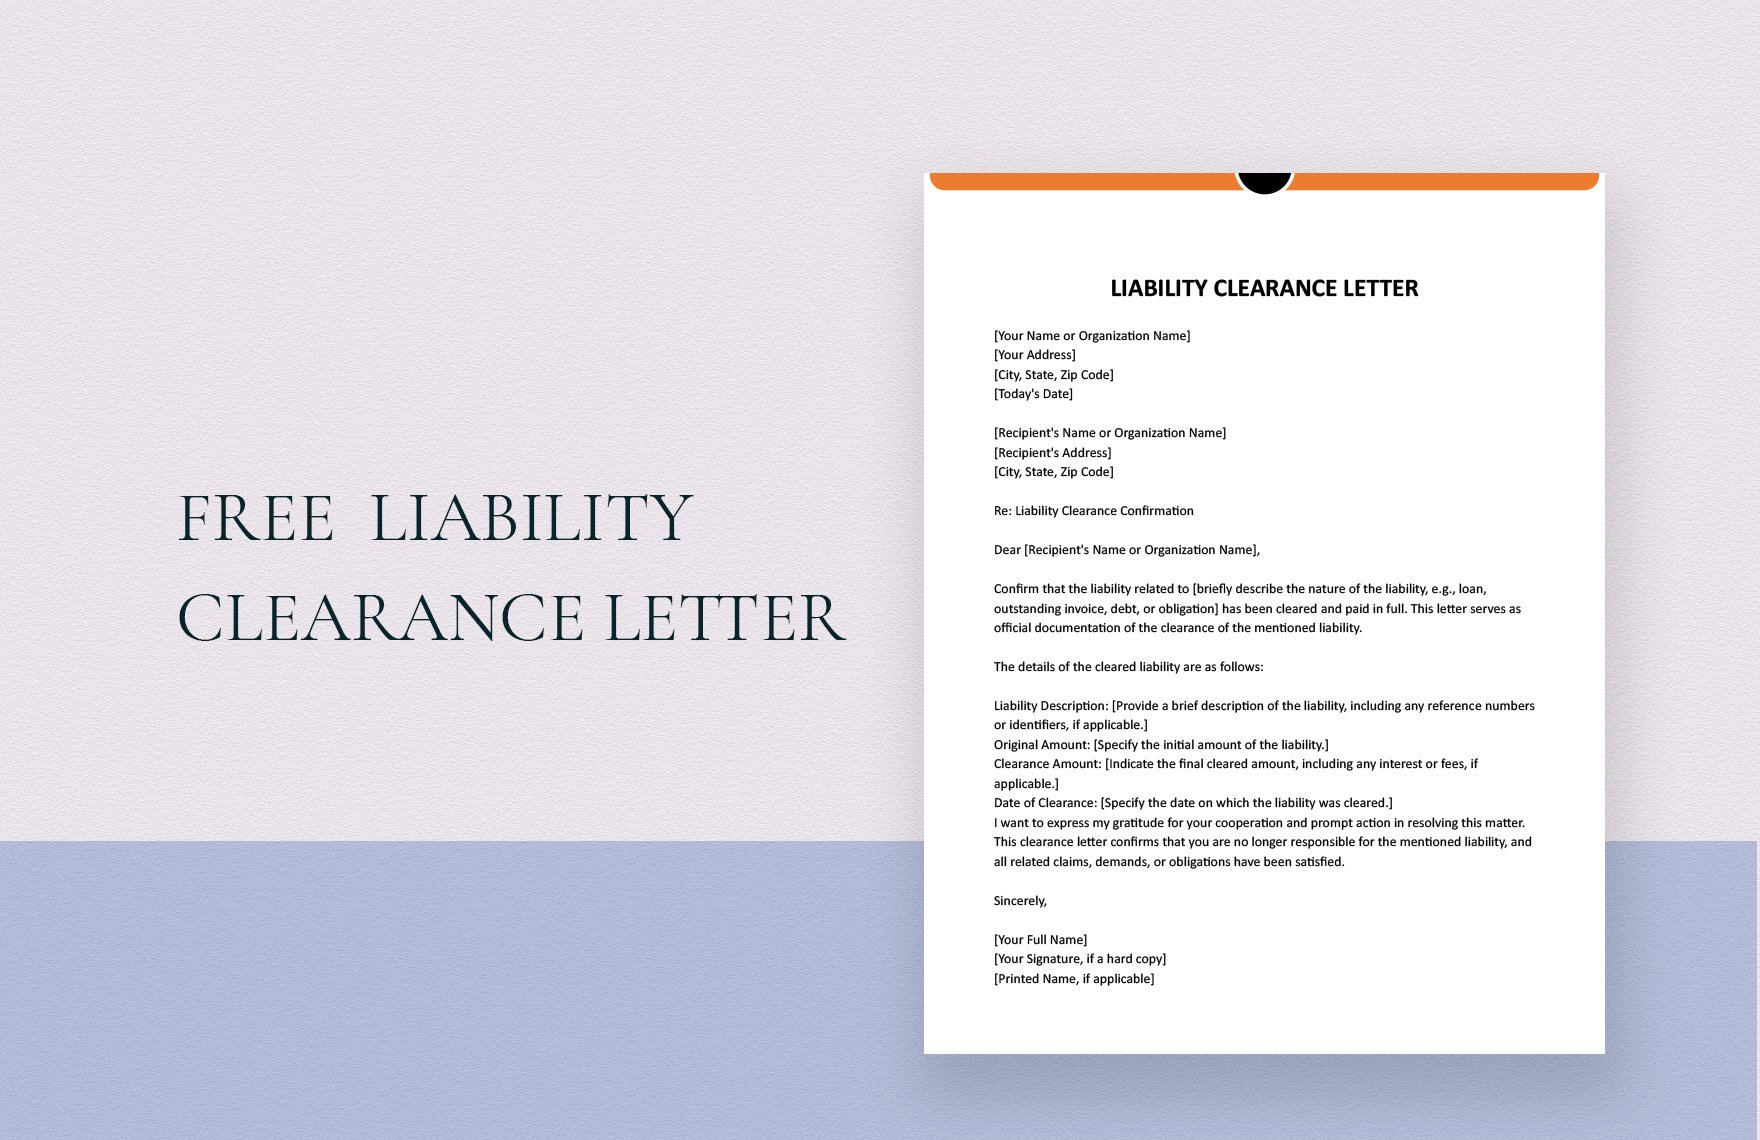 Liability Clearance Letter in Word, Google Docs